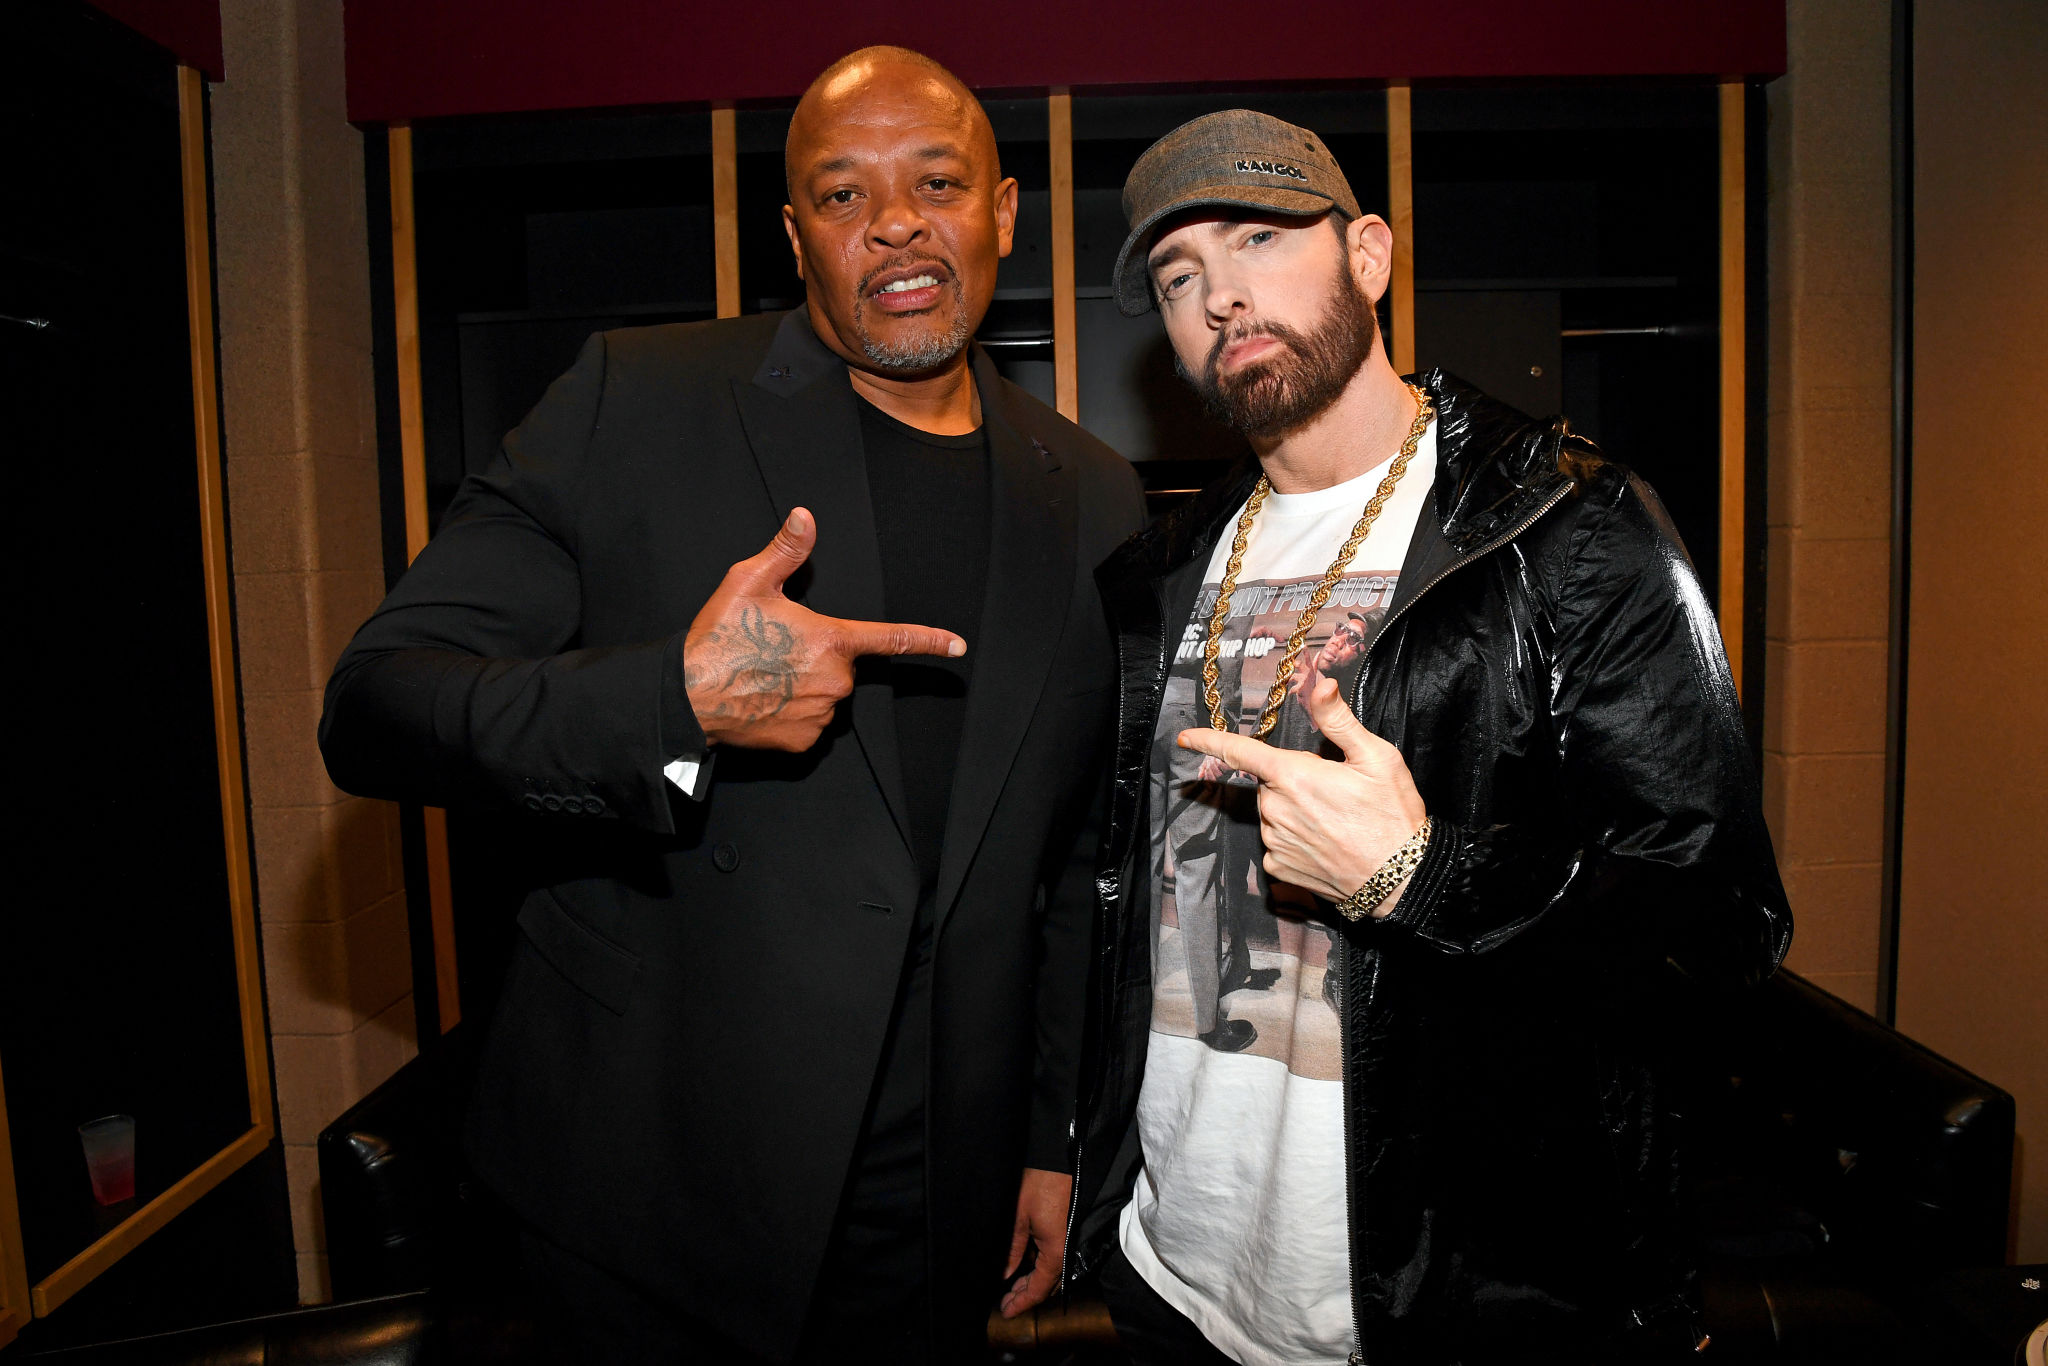 CLEVELAND, OHIO - OCTOBER 30: Dr. Dre and Eminem pose backstage during the 36th Annual Rock & Roll Hall Of Fame Induction Ceremony at Rocket Mortgage Fieldhouse on October 30, 2021 in Cleveland, Ohio. (Photo by Kevin Mazur/Getty Images for The Rock and Roll Hall of Fame )